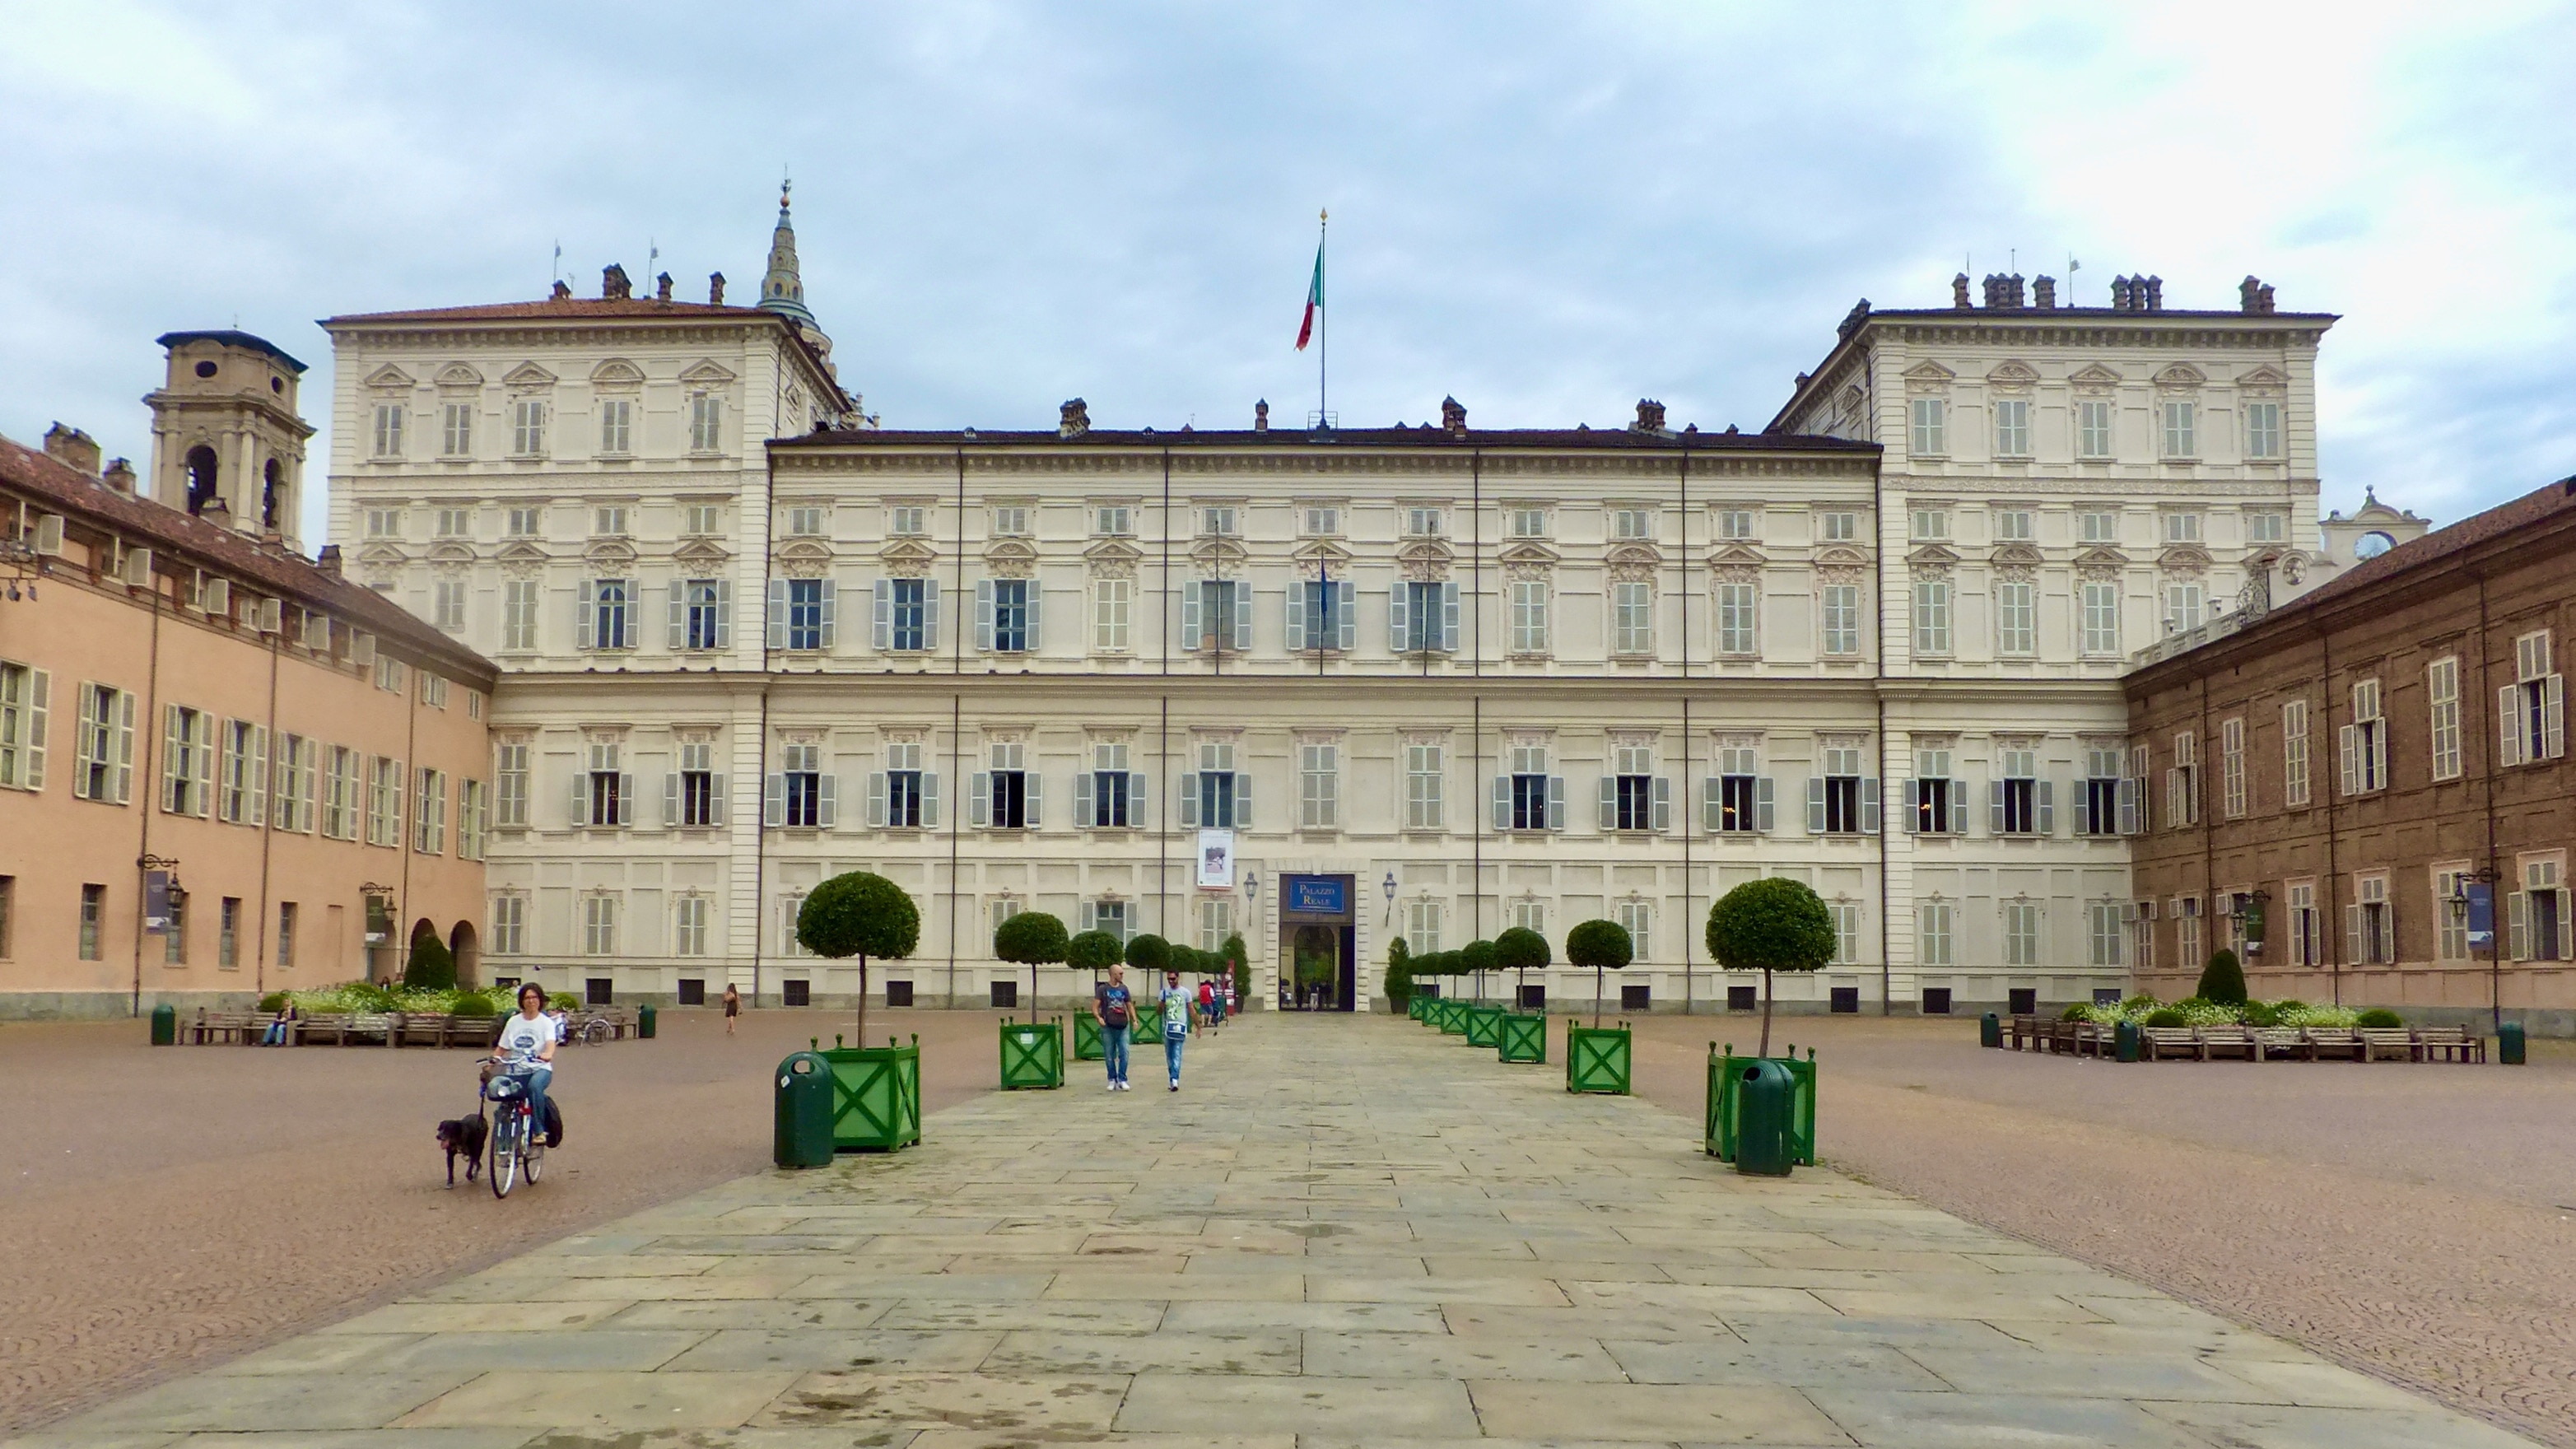 Royal Palace (Palazzo Reale) in Turin, Italy